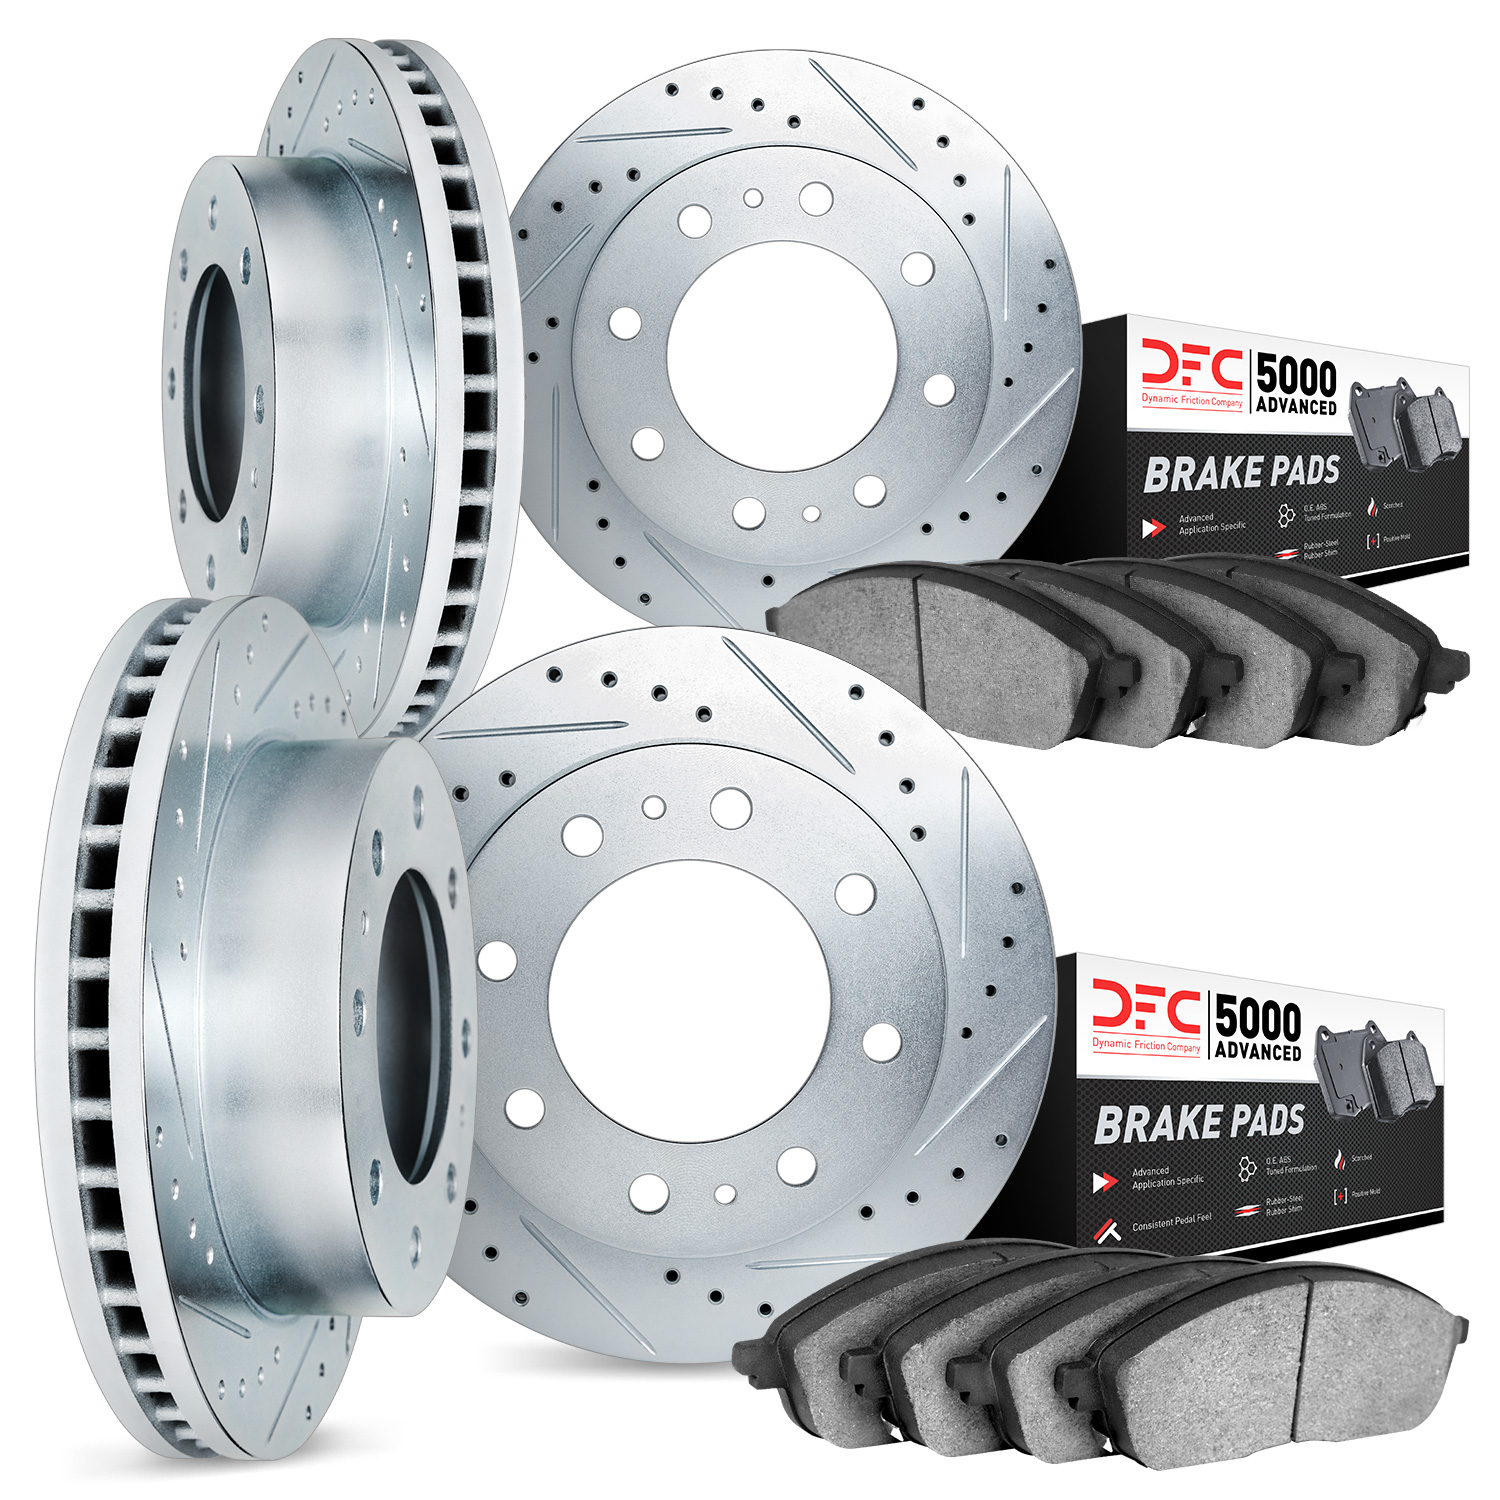 7504-48014 Drilled/Slotted Brake Rotors w/5000 Advanced Brake Pads Kit [Silver], 2018-2020 GM, Position: Front and Rear